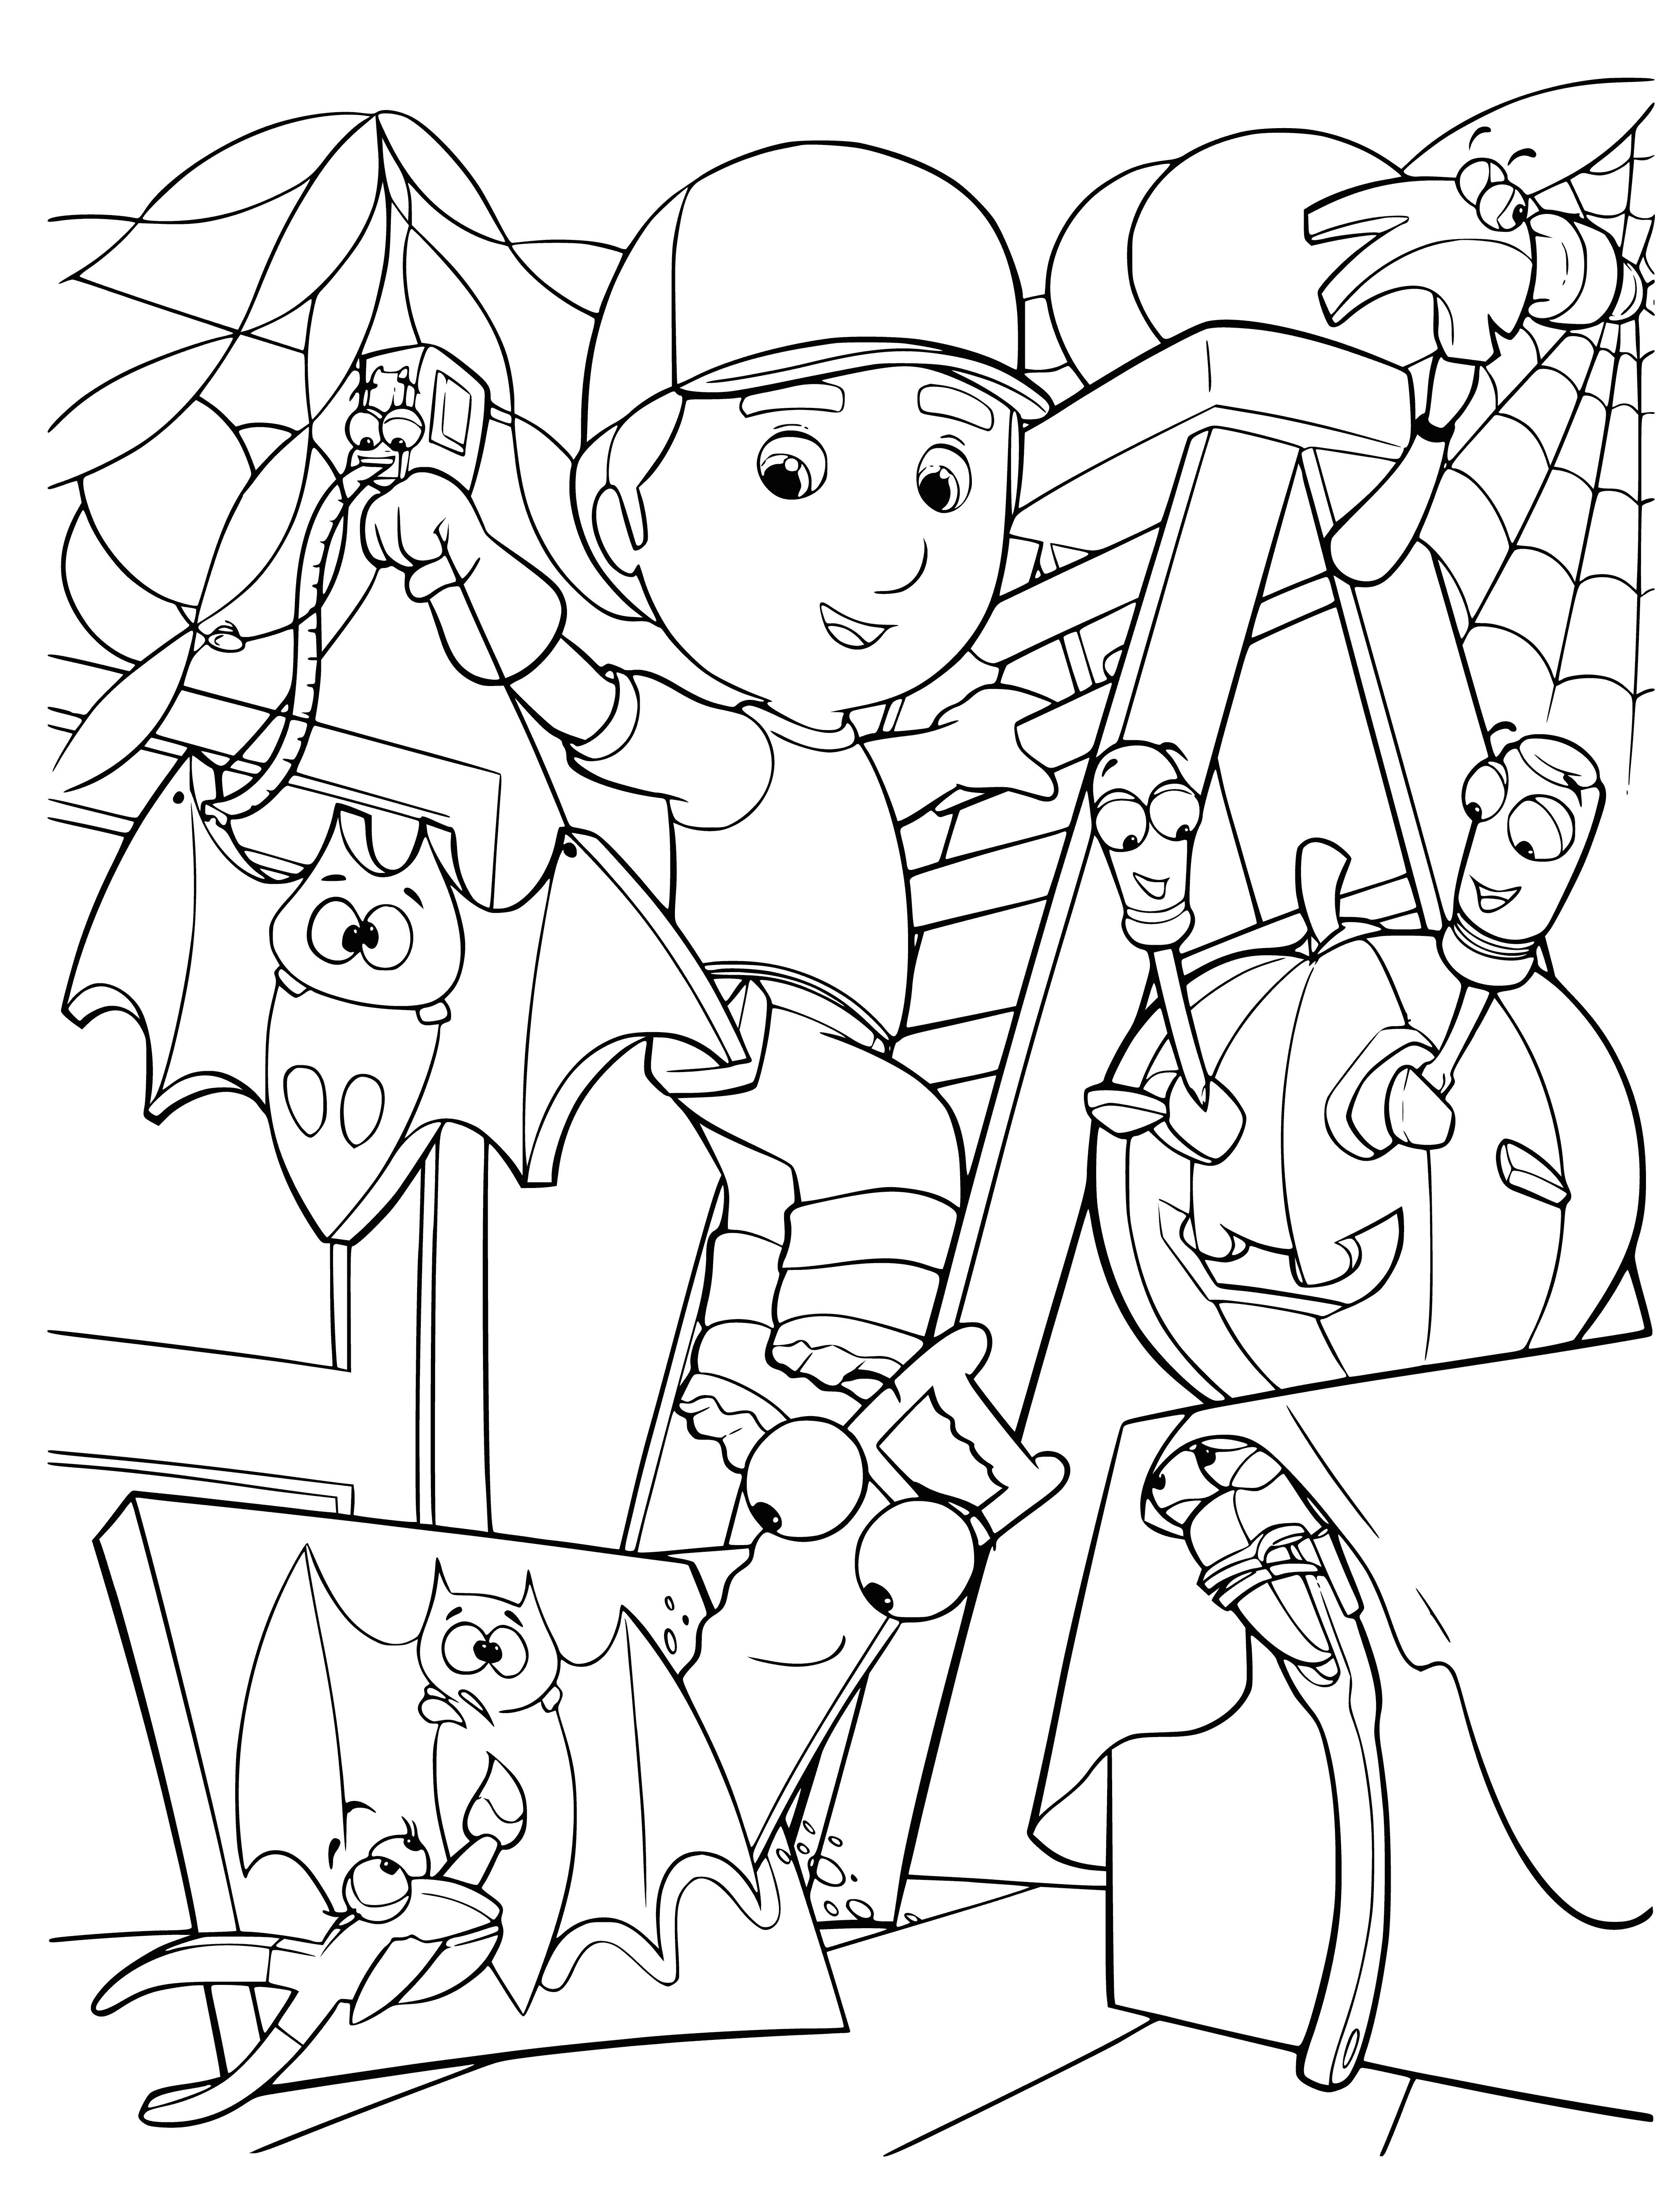 coloring page: Manny and tools prep for Halloween: Toolbelt sorts pumpkins, Pat paints jack-o-lantern, Turner &Stretch hang decorations, Squeeze near candy bowl.